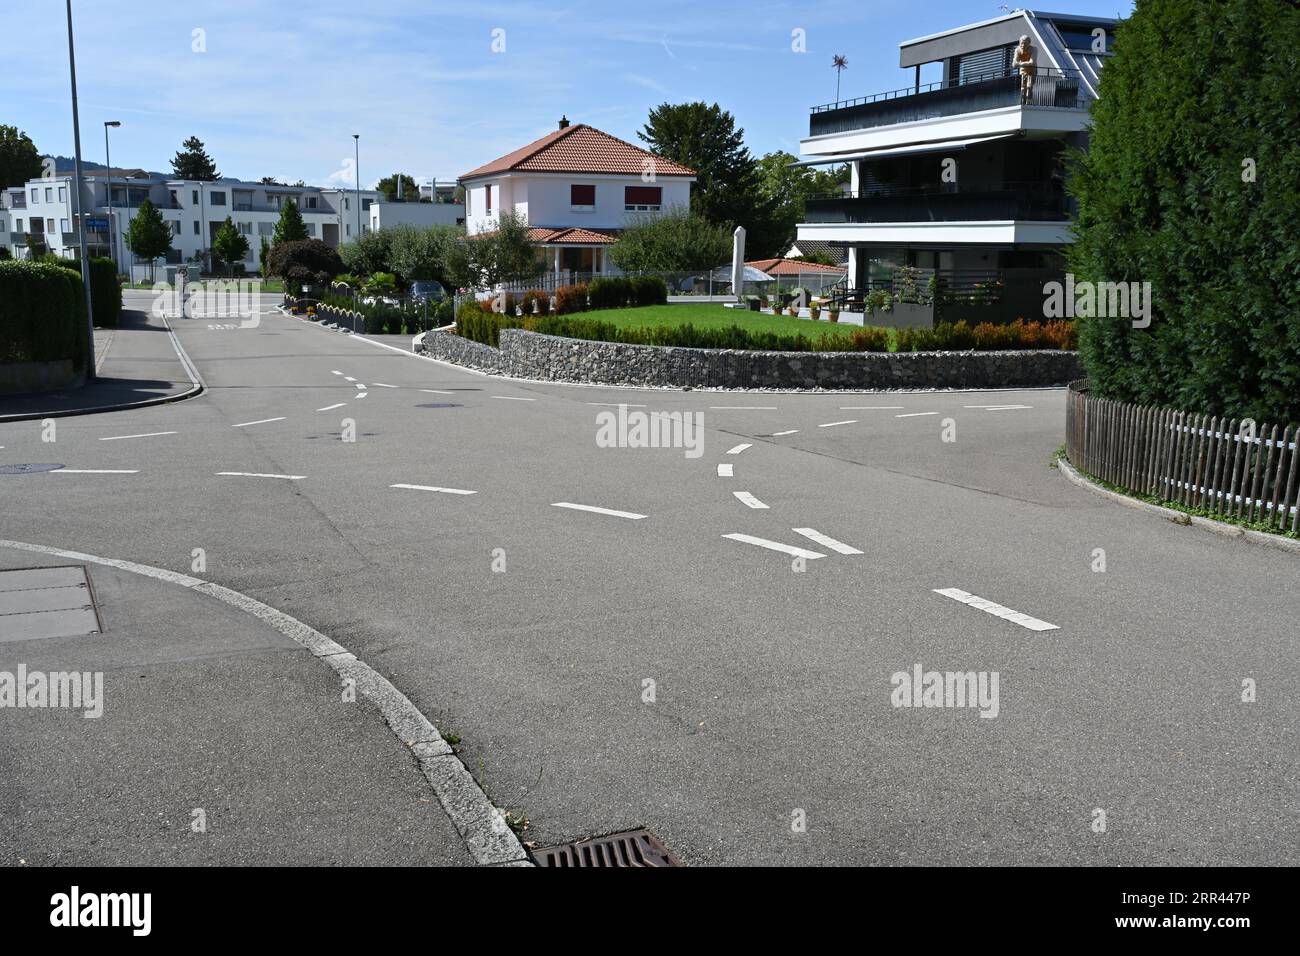 X shaped crossroad in a residential quarter of a Swiss village with broken lines helping the cars to keep on their respective side of the lane. Stock Photo